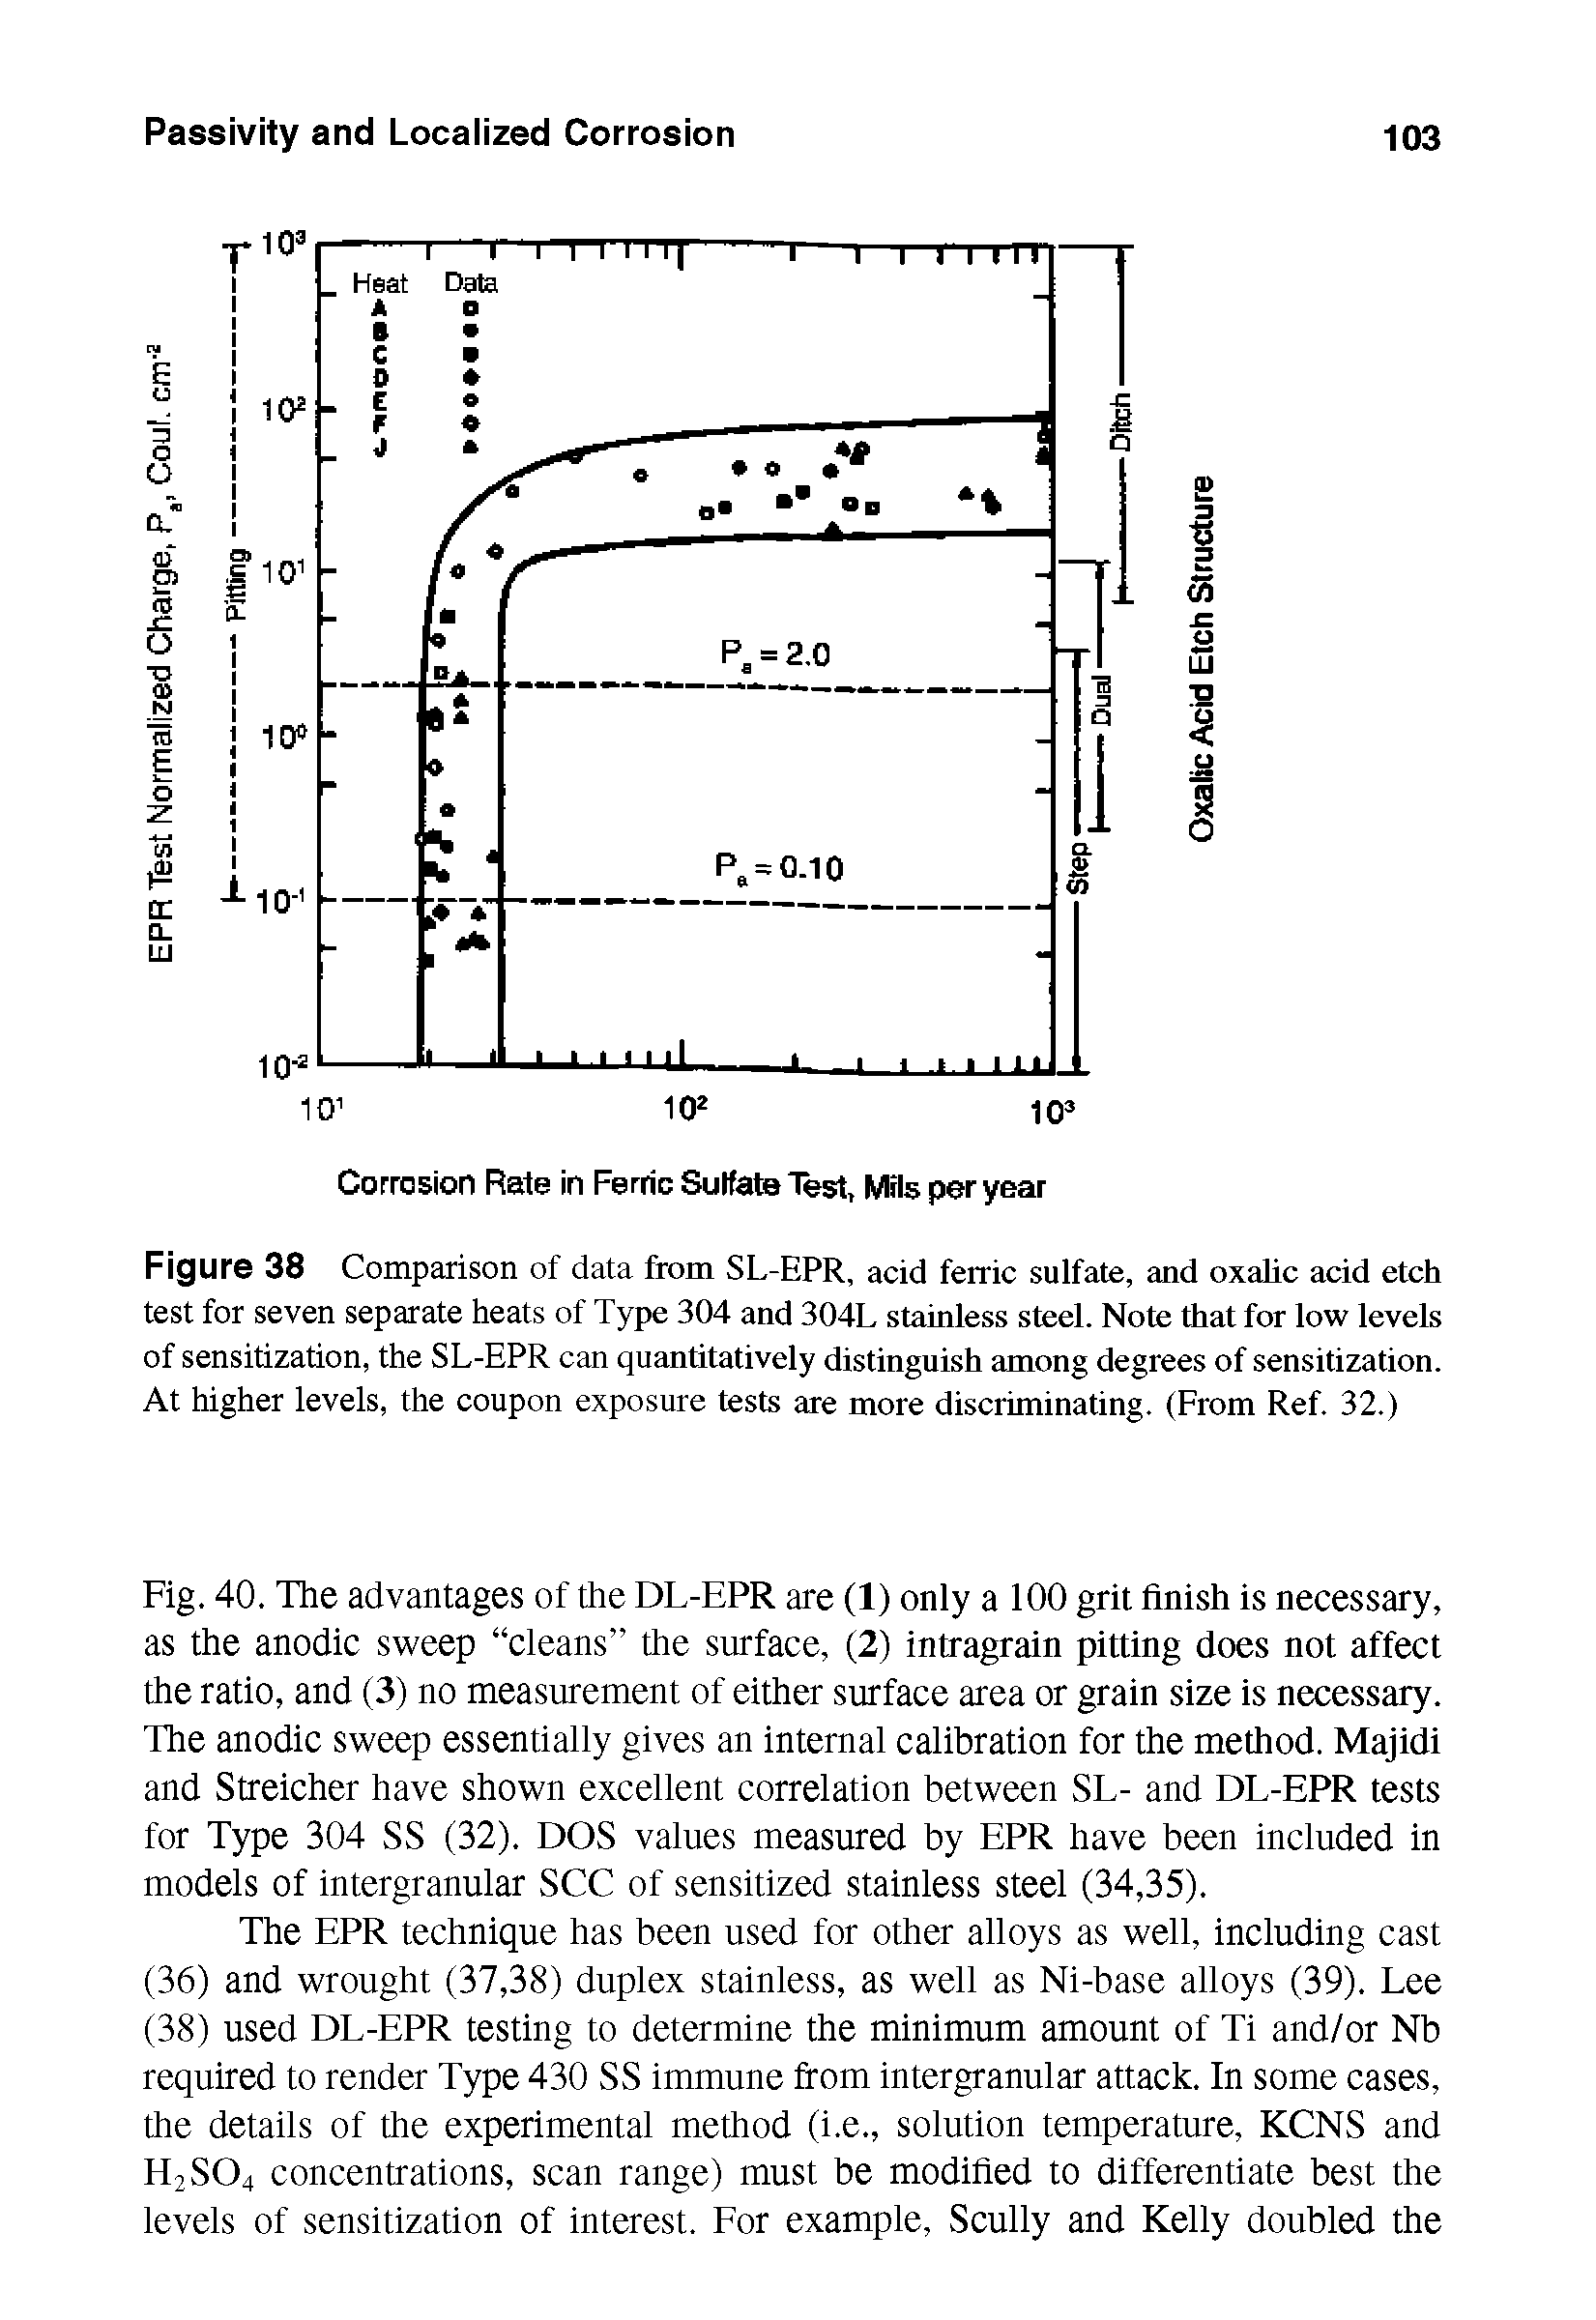 Figure 38 Comparison of data from SL-EPR, acid ferric sulfate, and oxalic acid etch test for seven separate heats of Type 304 and 304L stainless steel. Note that for low levels of sensitization, the SL-EPR can quantitatively distinguish among degrees of sensitization. At higher levels, the coupon exposure tests are more discriminating. (From Ref. 32.)...